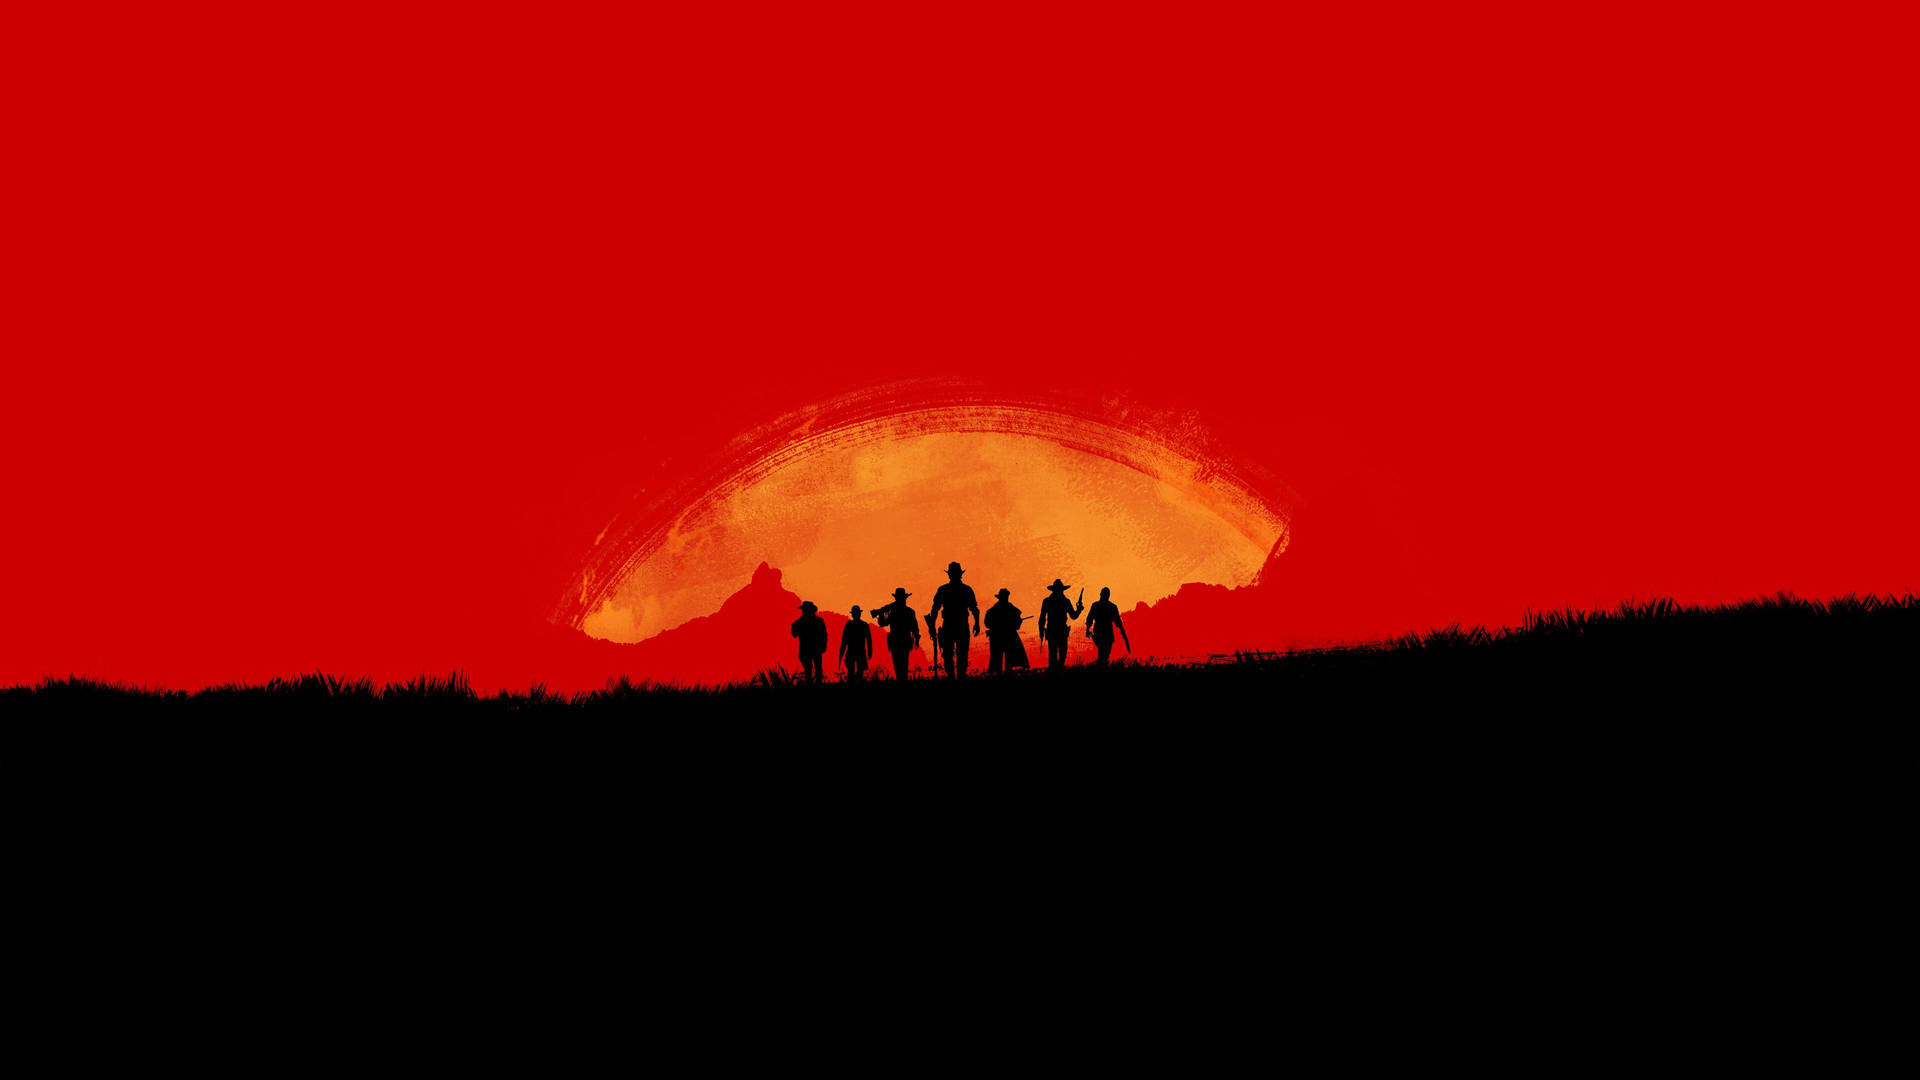 Oled 4k Red Dead Redemption 2 Silhouettes